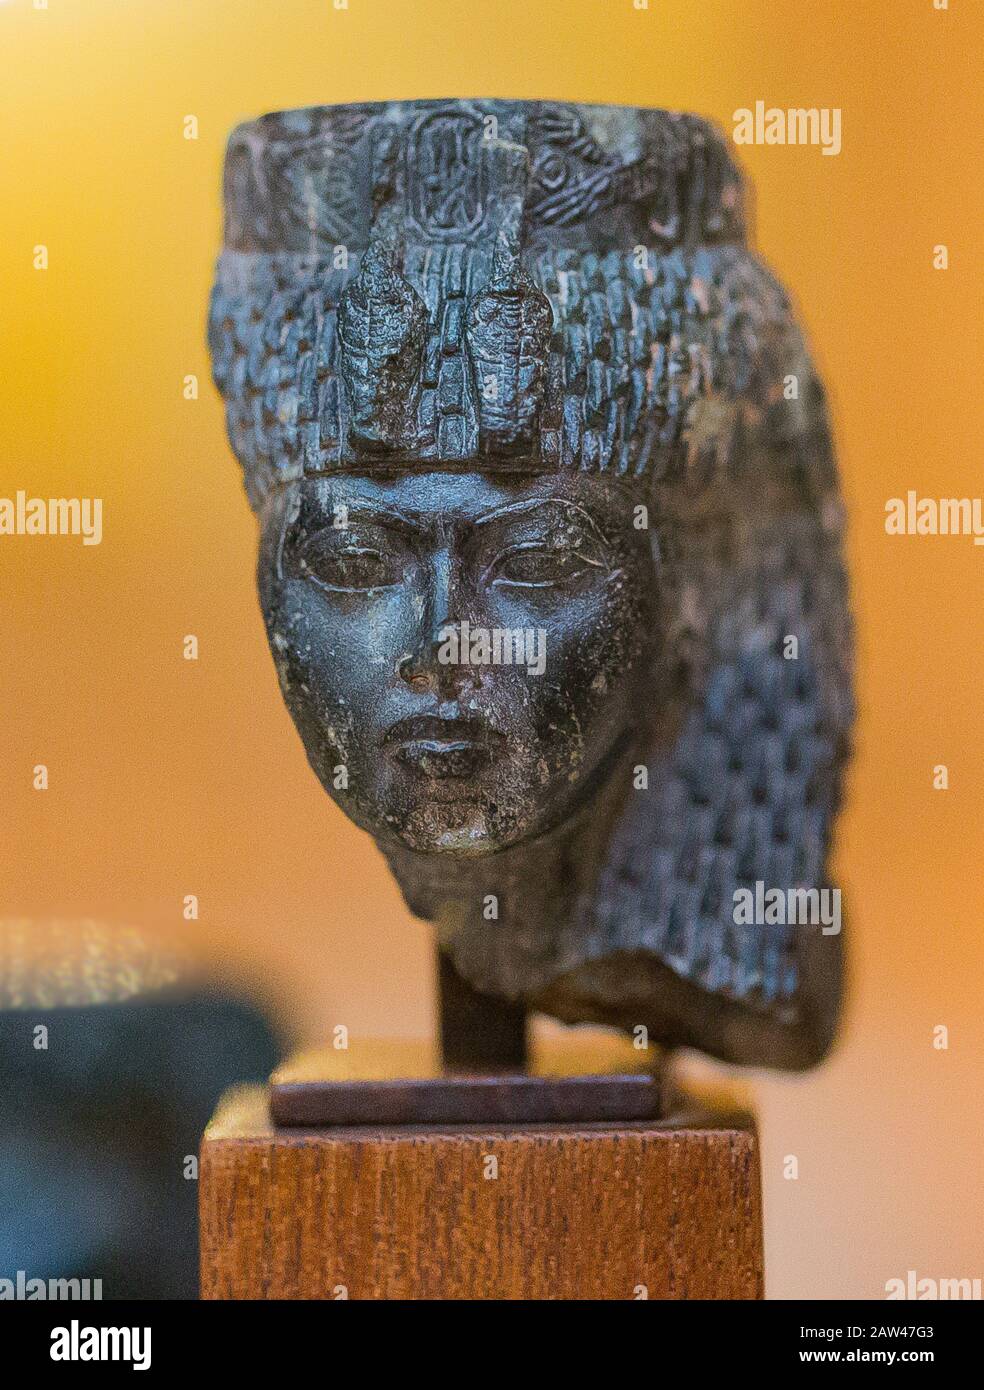 Egypt, Cairo, Egyptian Museum, small head of the queen Tiye, the wife of Amenhotep III. It was found in the temple of Hathor, Serabit el Khadim, Sinai. Stock Photo